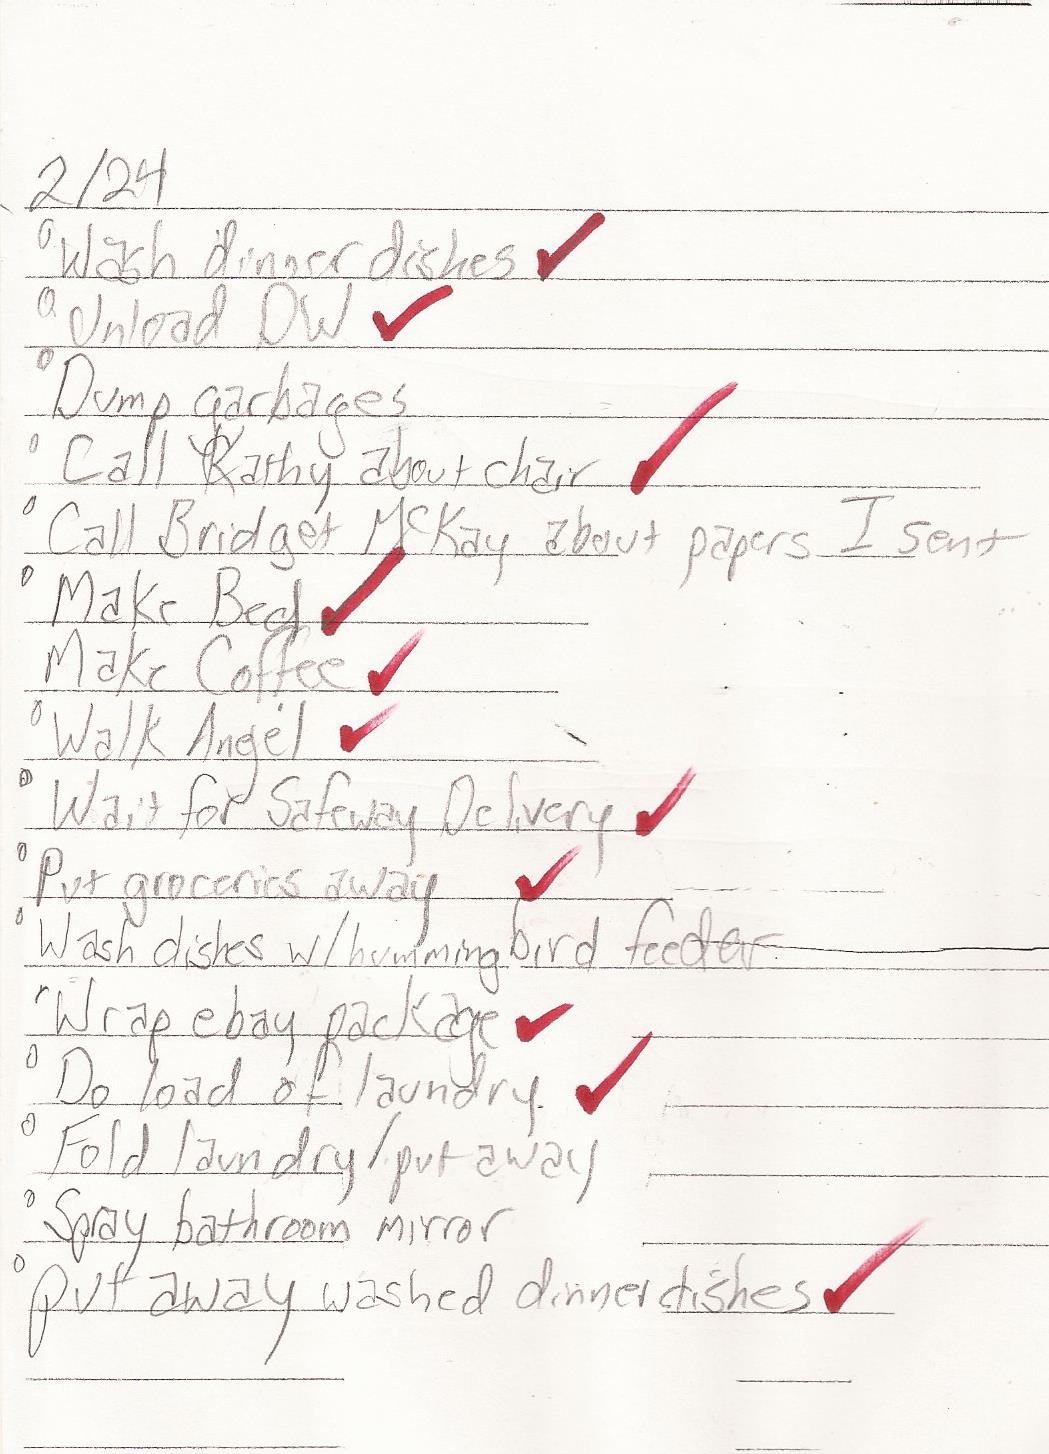 Scan of updated to do list 